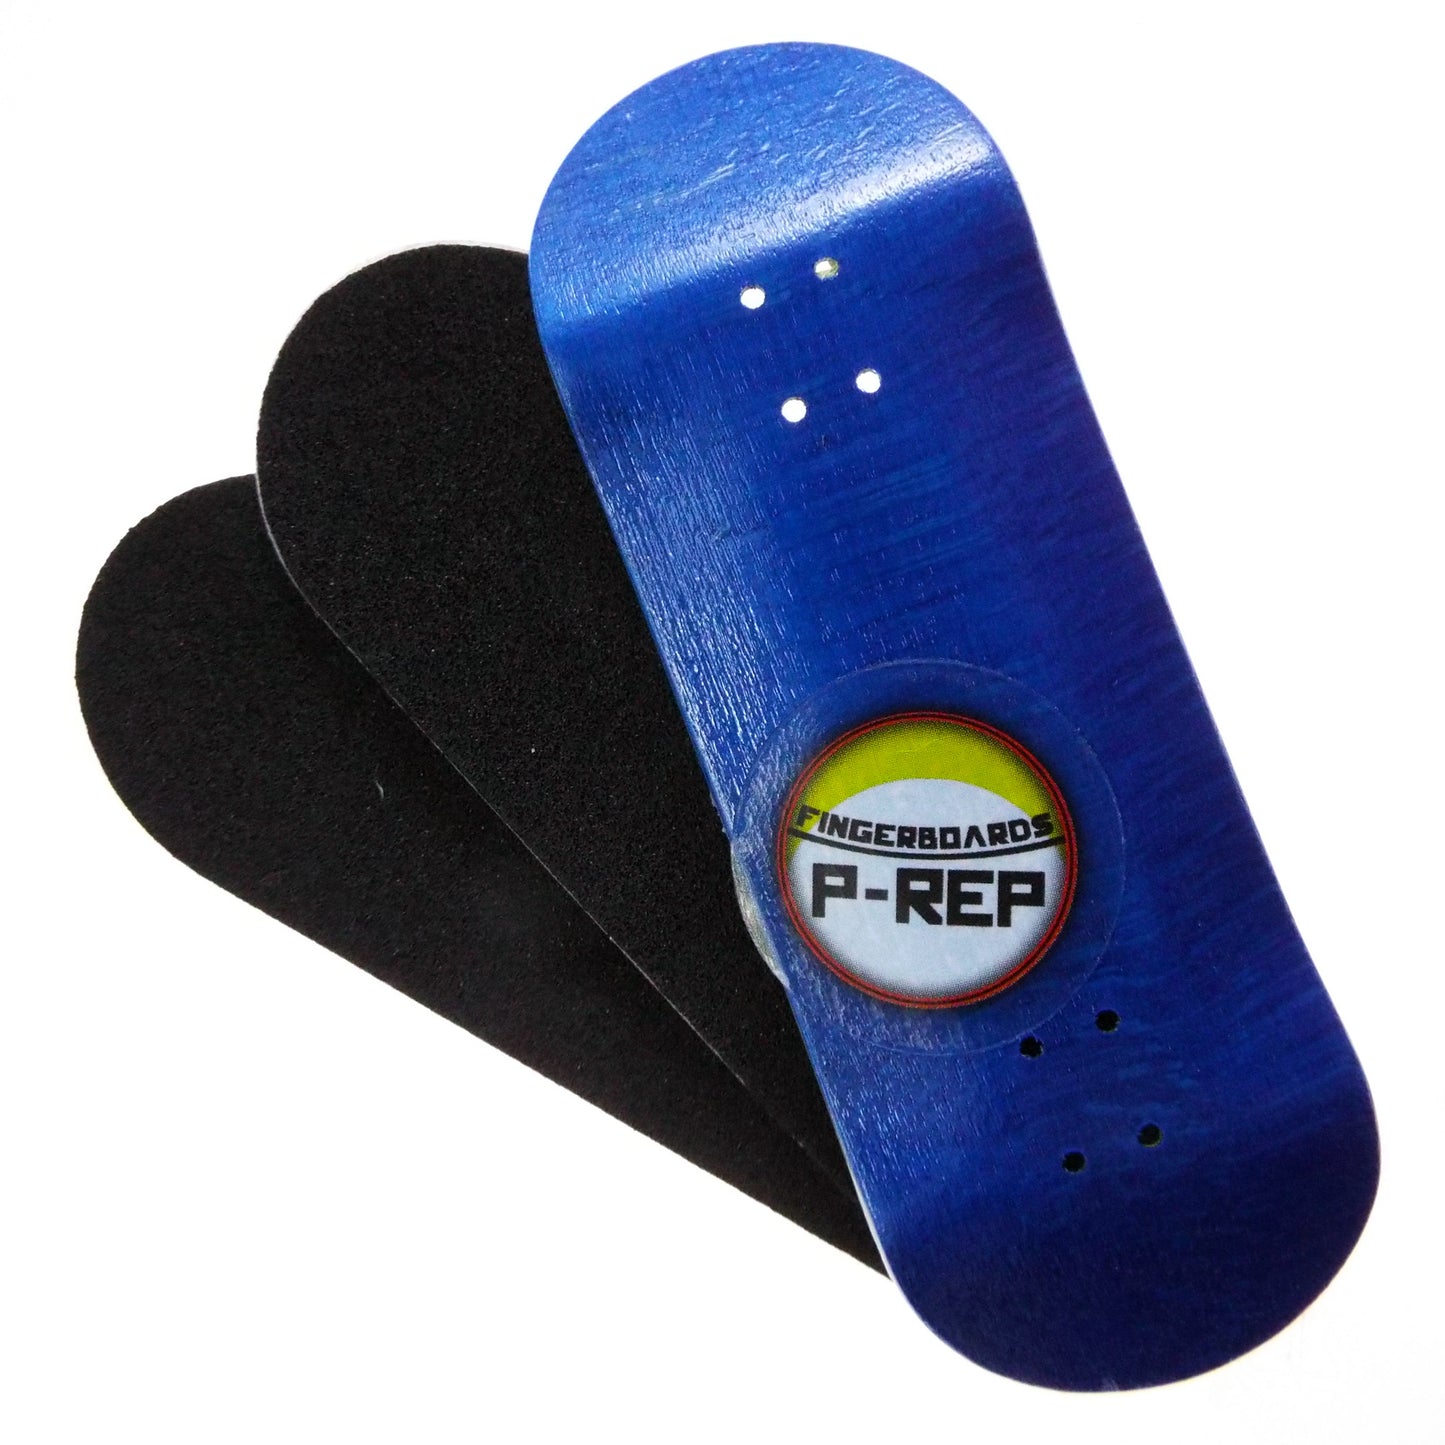 P-REP  32mm x 97mm V2 Performance Complete - Blue